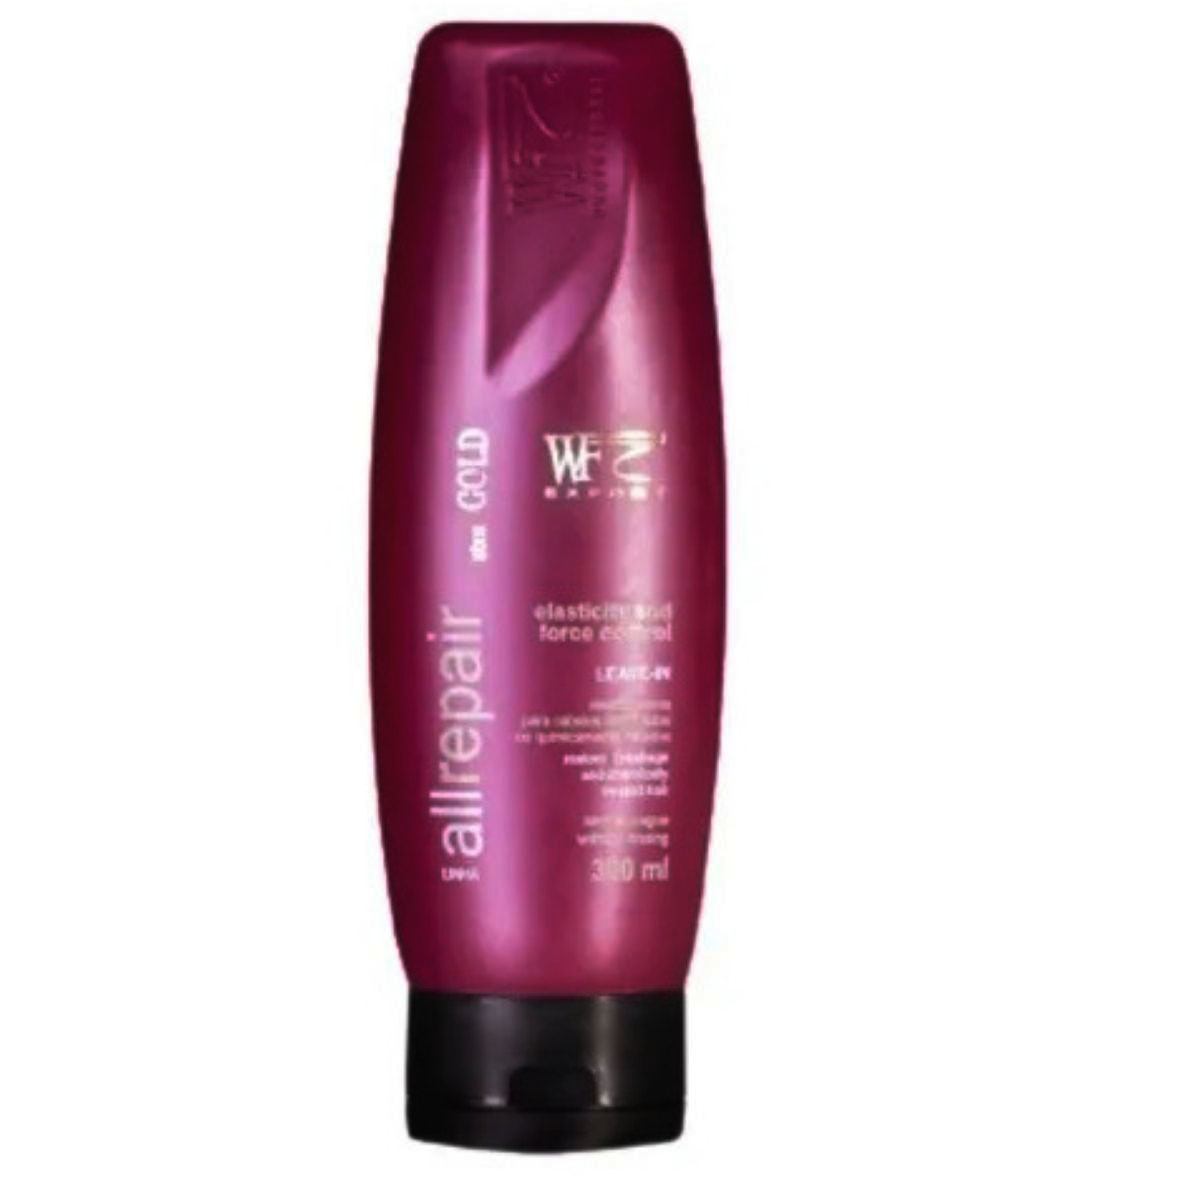 ALL REPAIR - LEAVE-IN ELASTICITY FORCE CONTROL WF COSMETICOS 300ML